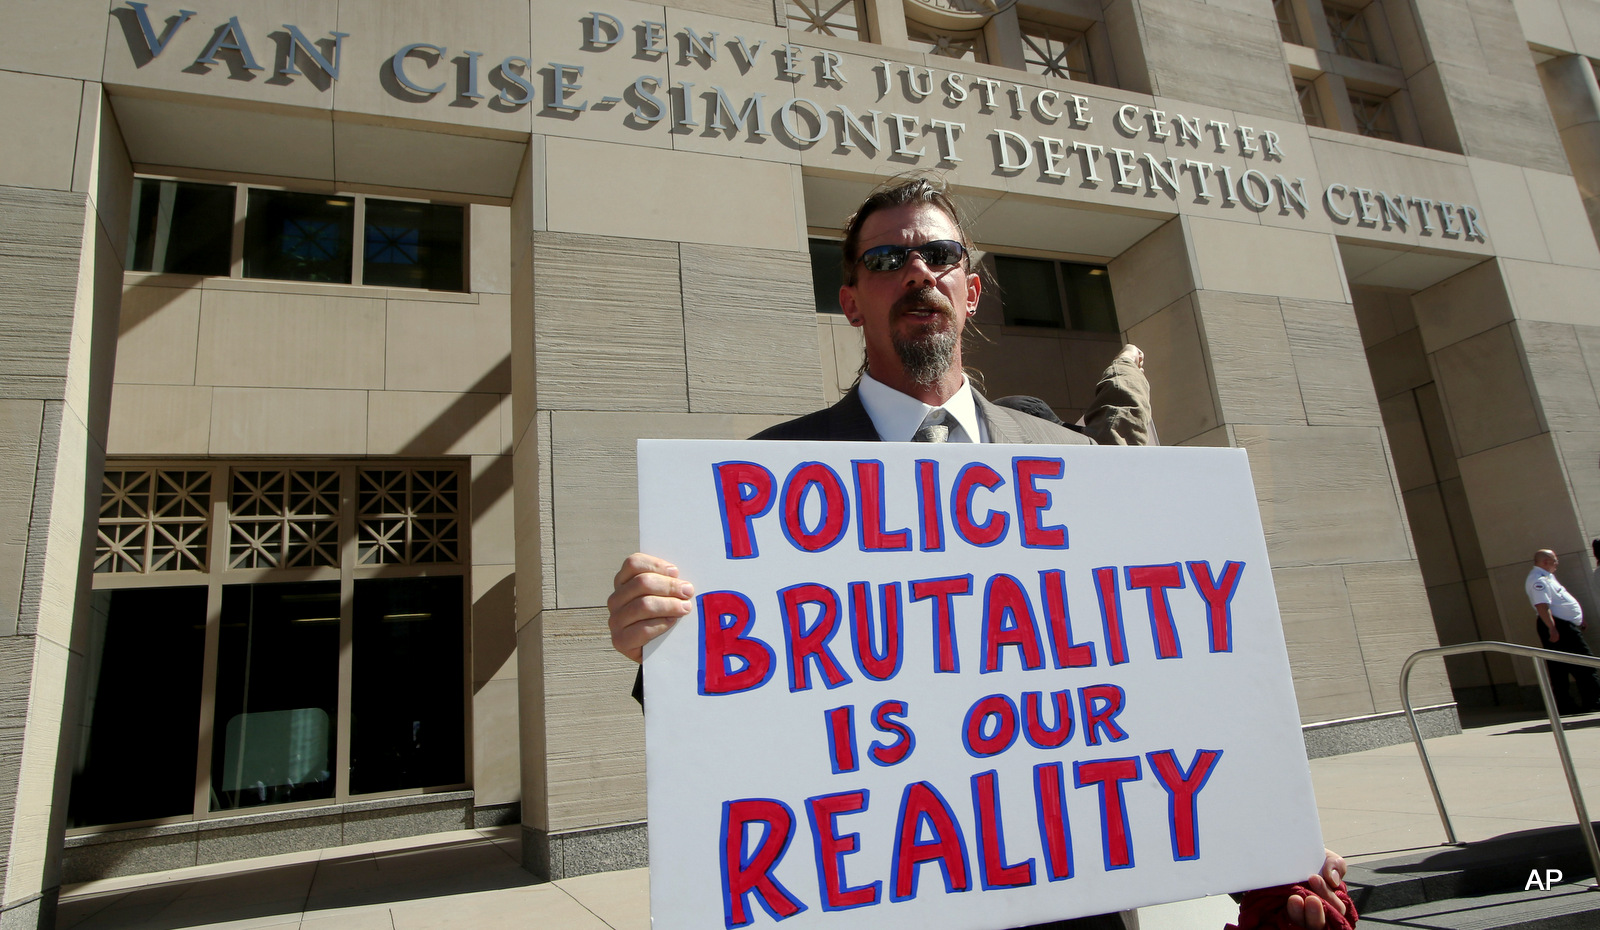 A protester Michael J. Moore holds a sign against the city jail in Denver, CO.